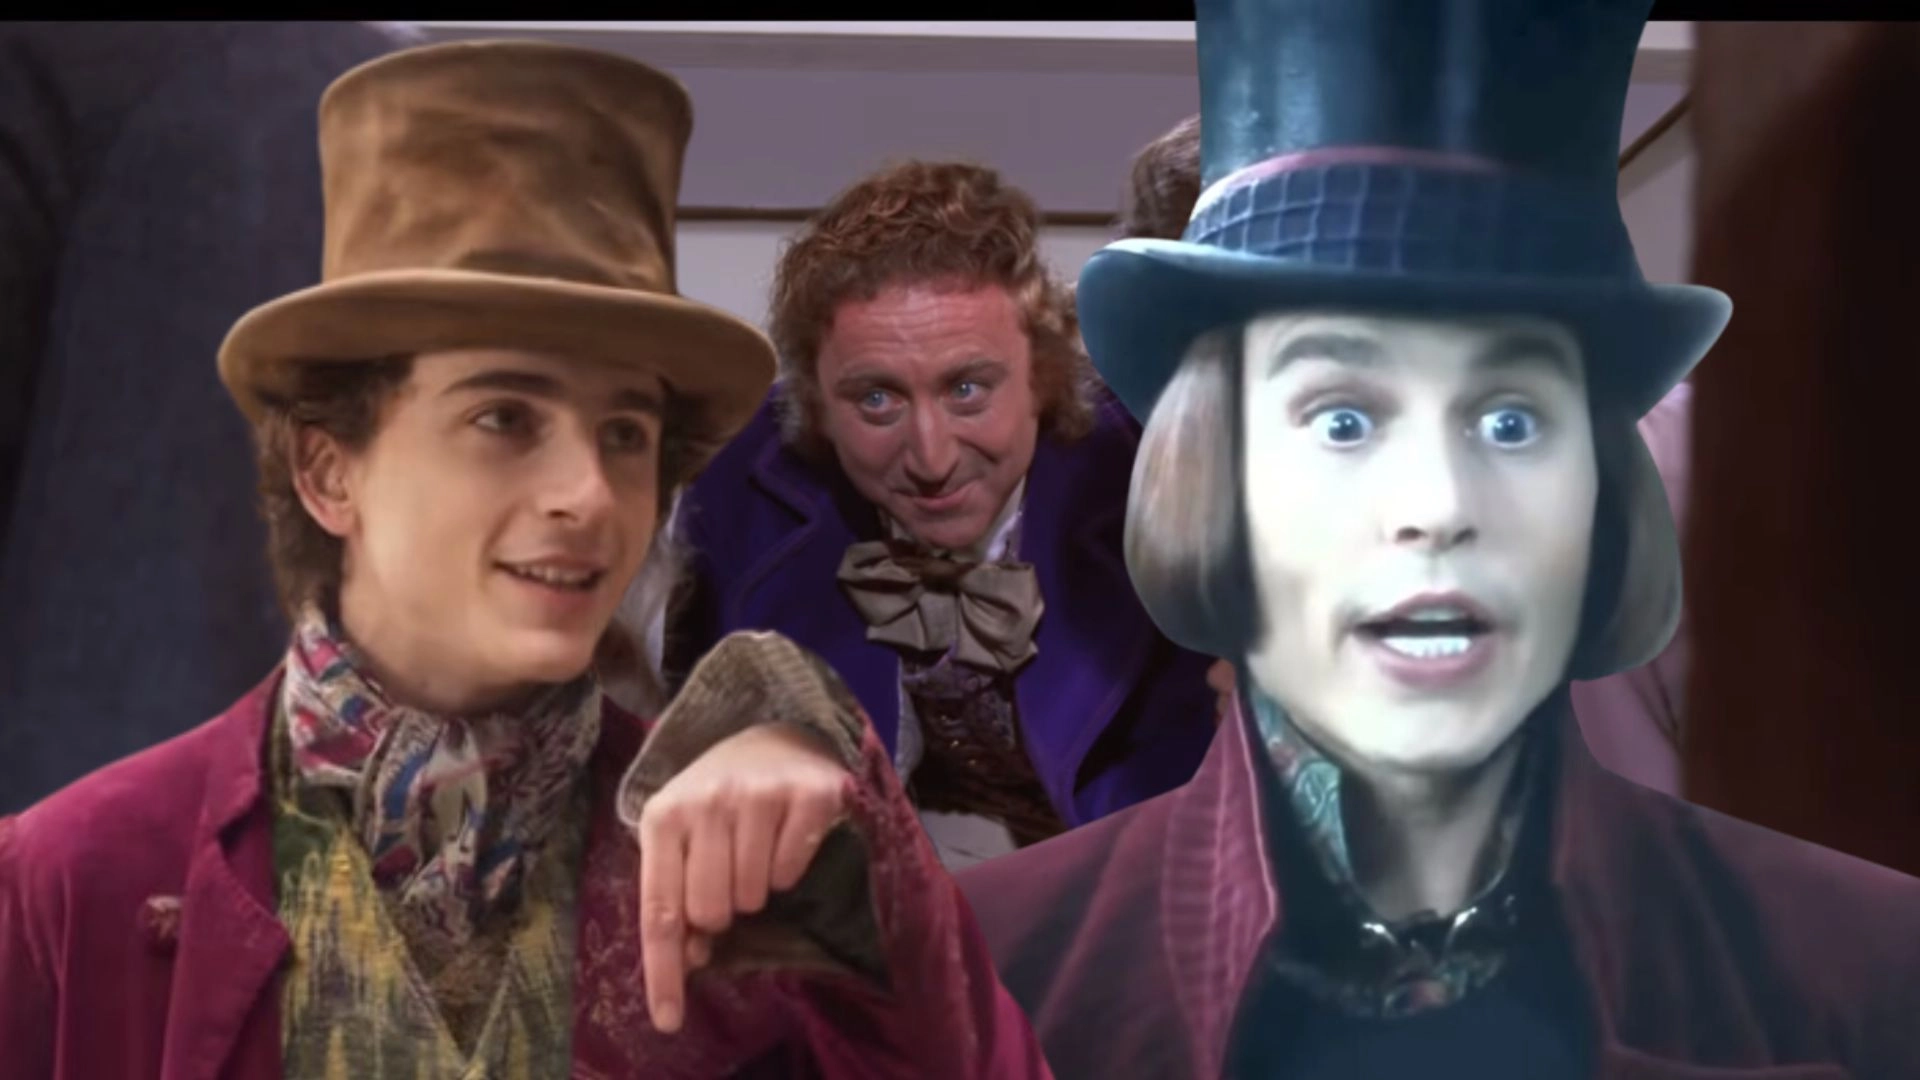 All 3 Willy Wonka movies, ranked from worst to best